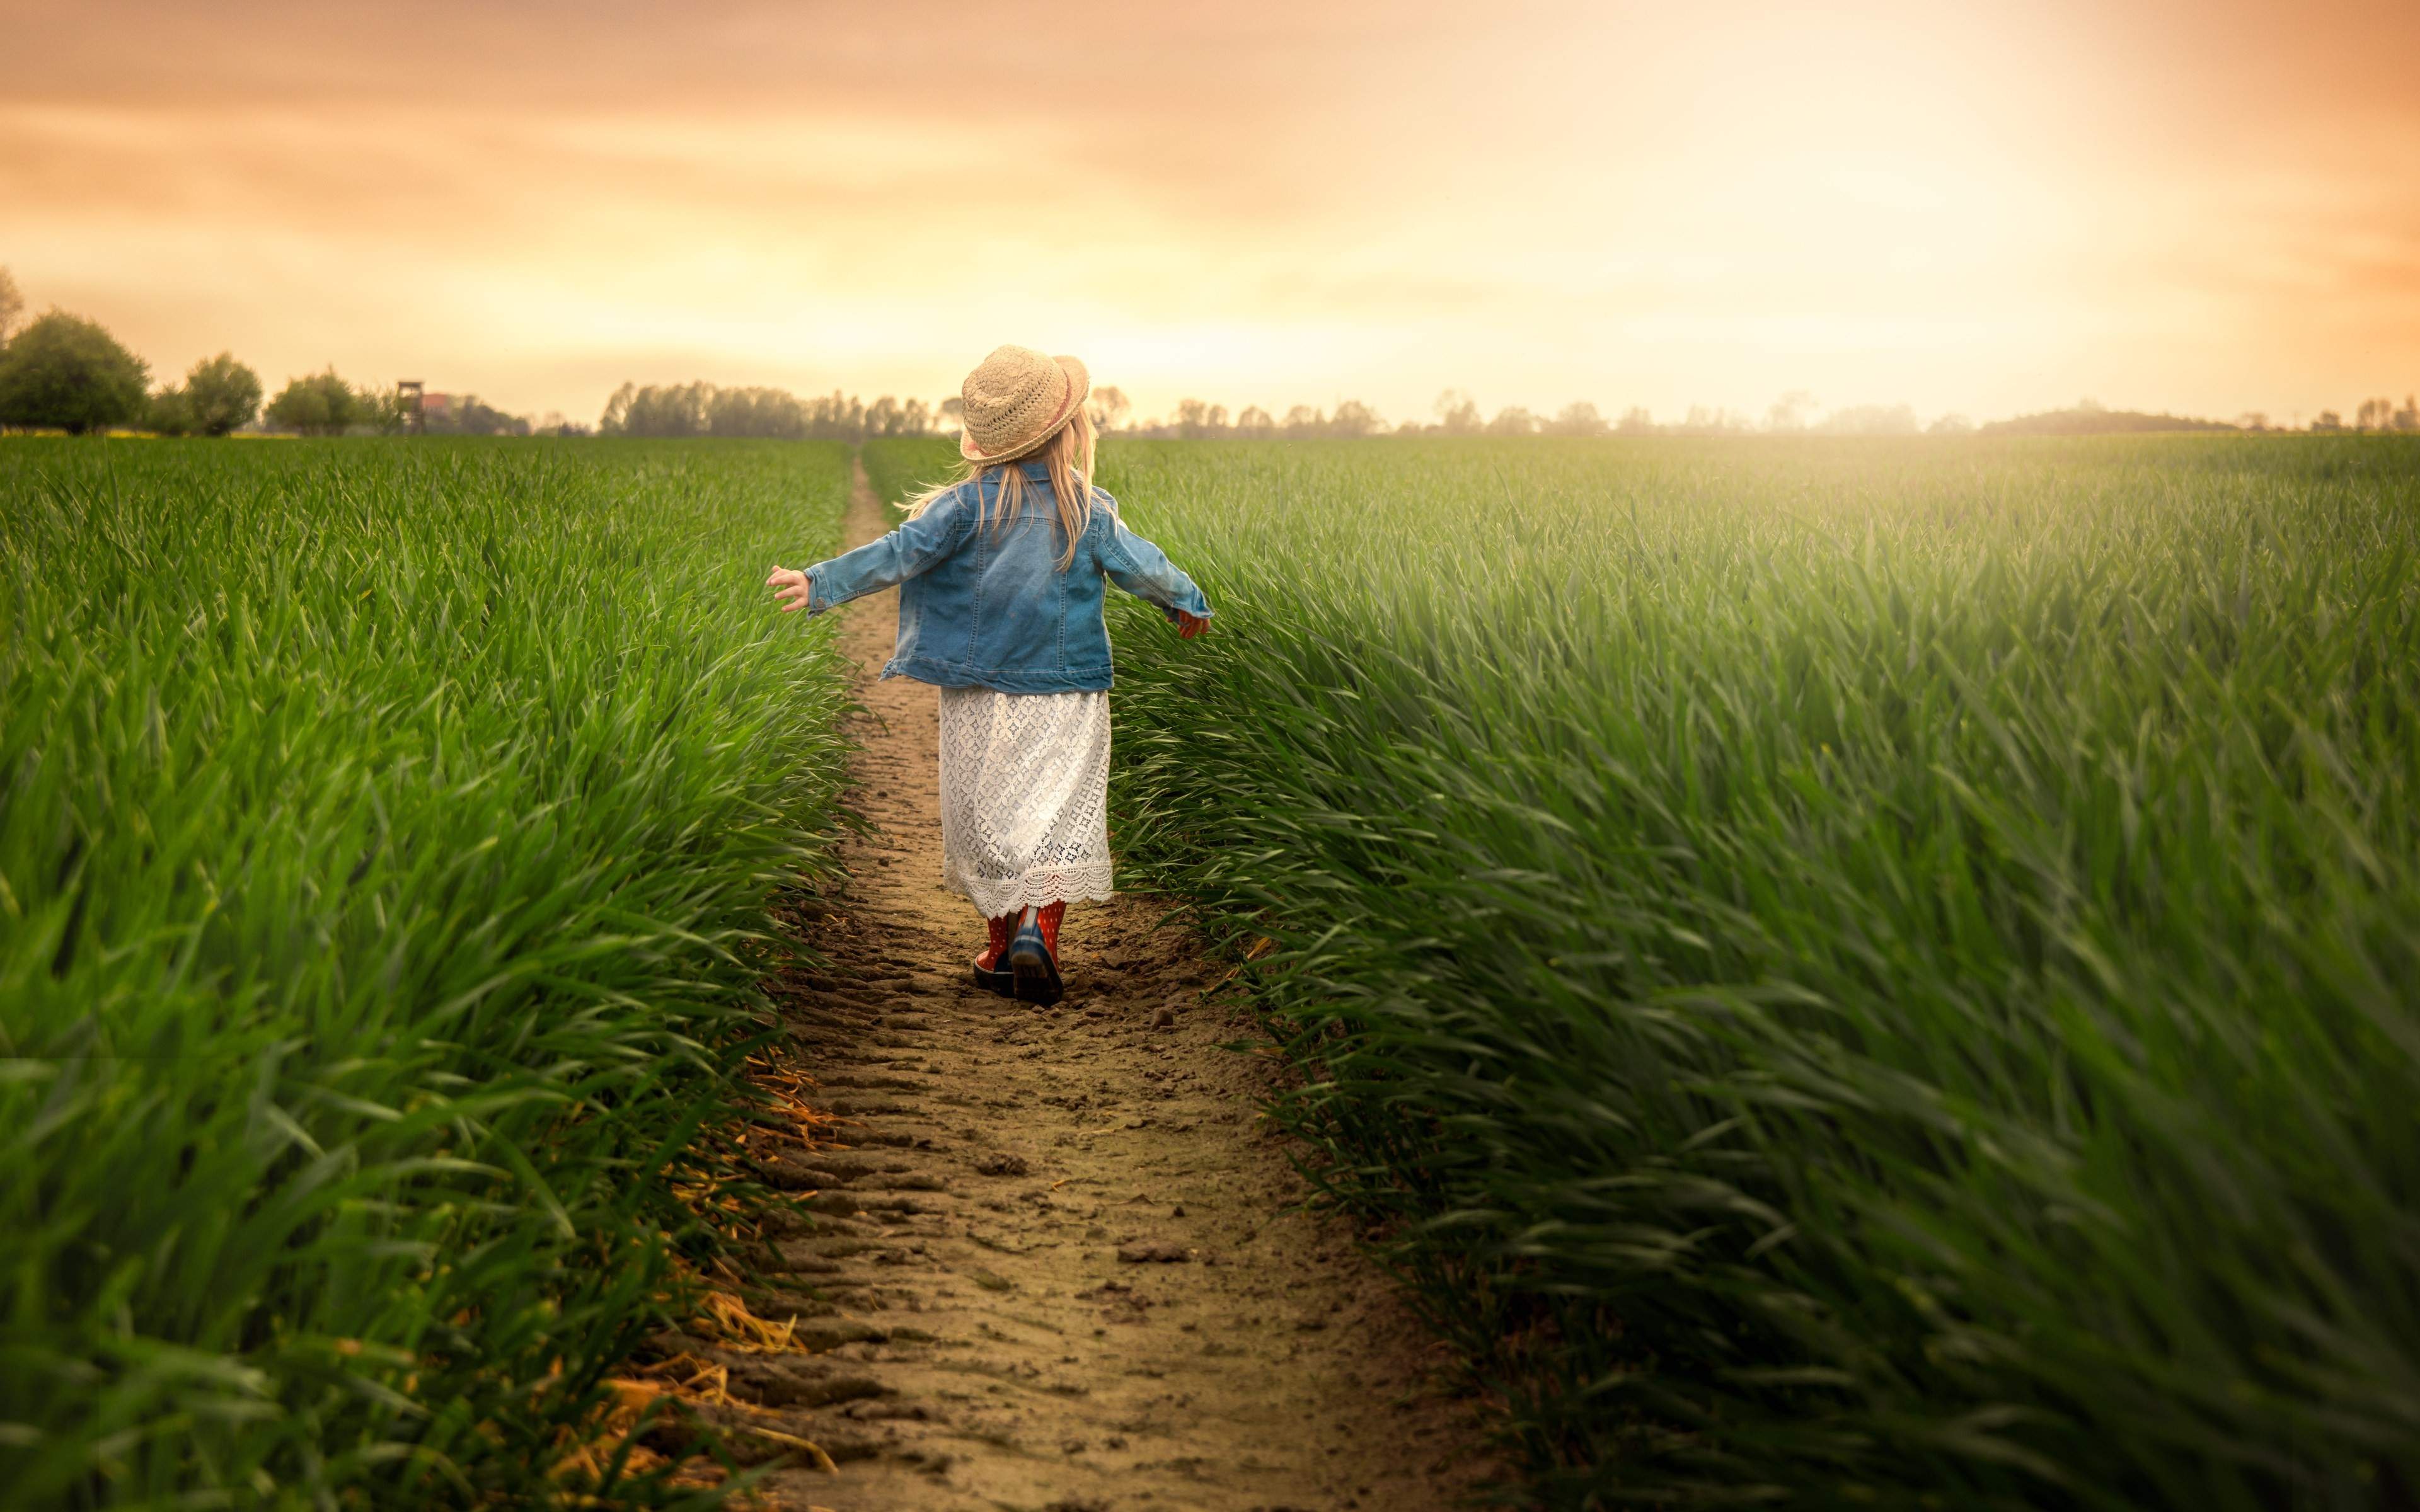 Child in the green field at sunset wallpaper 3840x2400